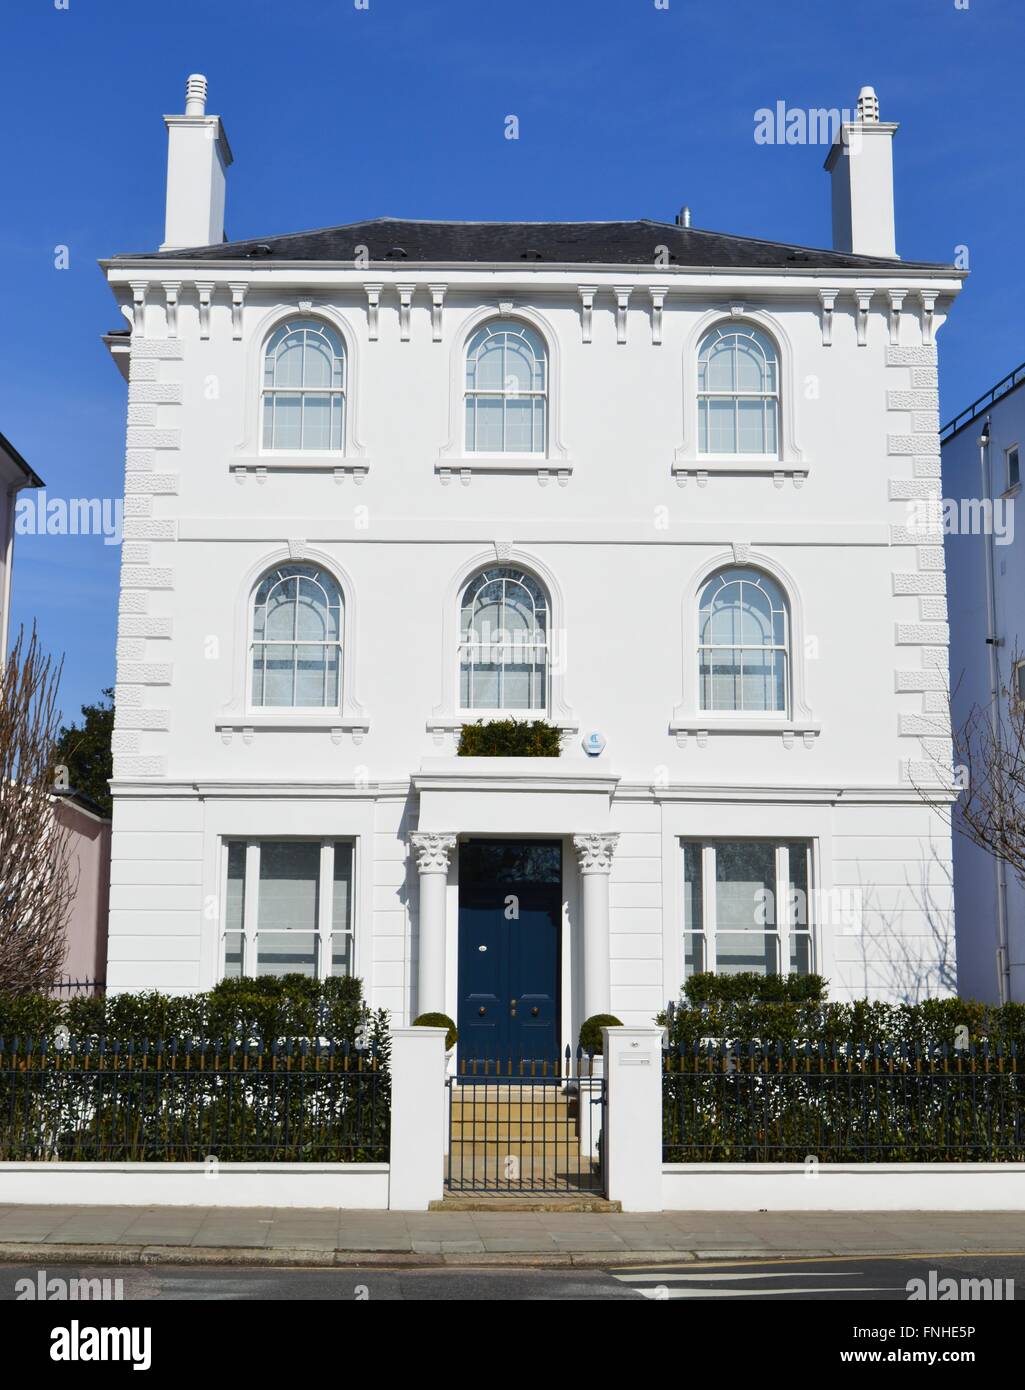 Large and beautiful white double fronted Victorian house in Primrose Hill, London UK. A dream home, prime property real estate, Stock Photo